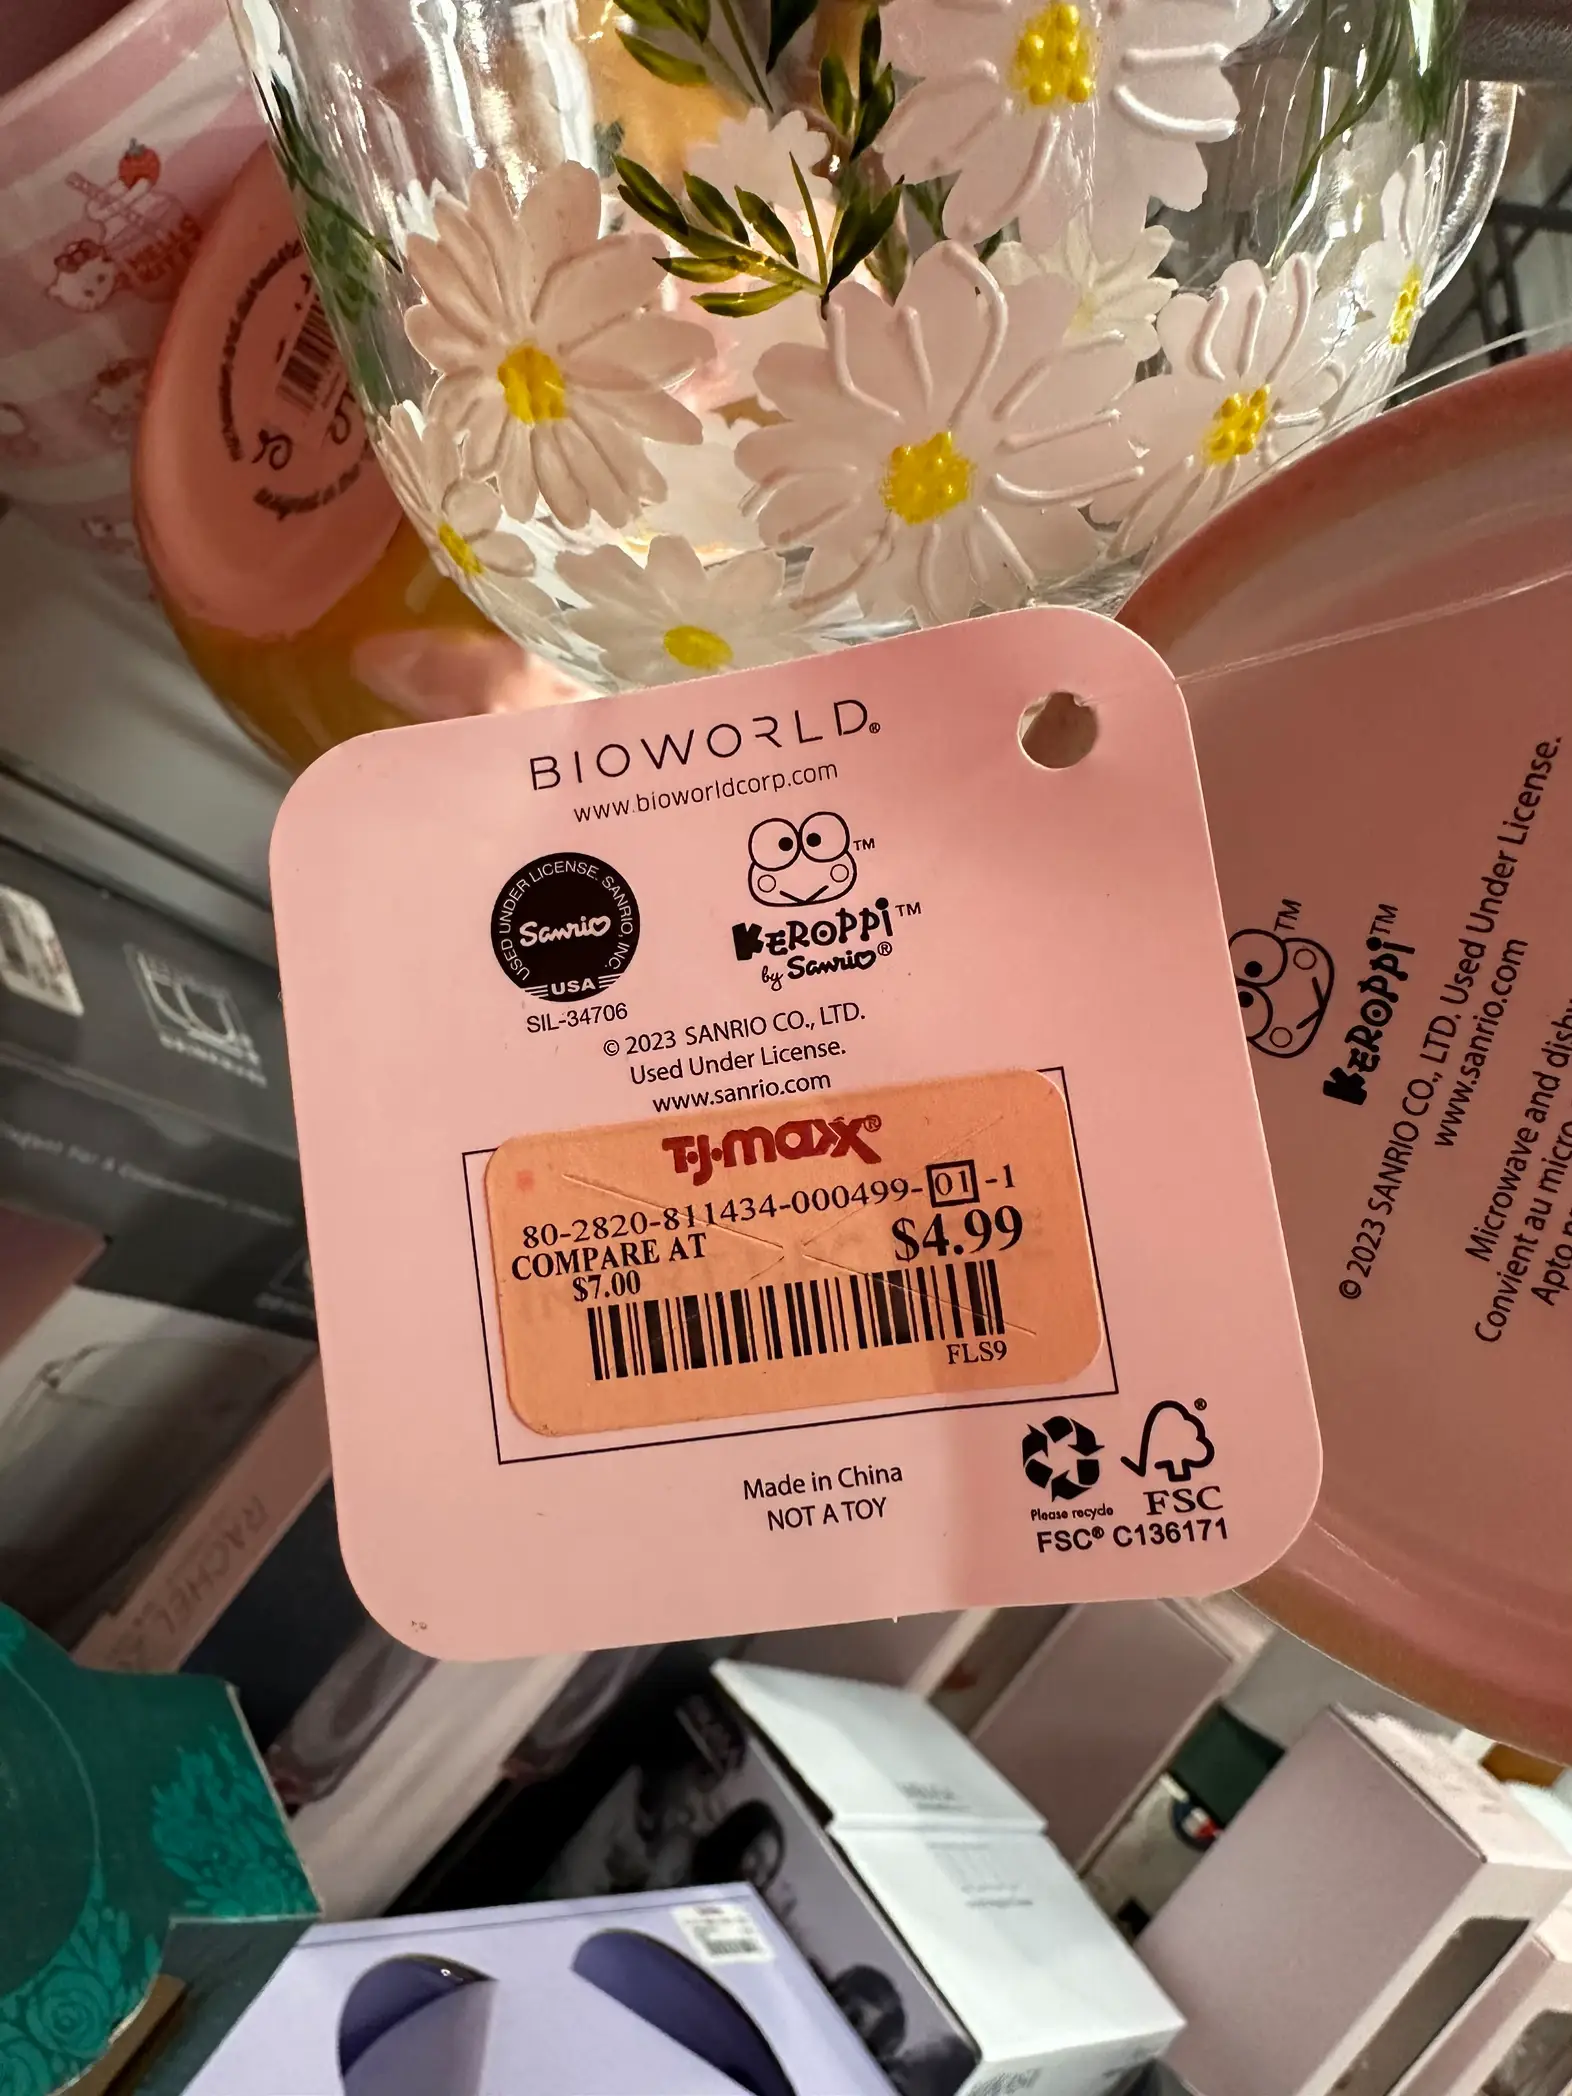 HELLO KITTY AT TJMAXX, Gallery posted by Stacey